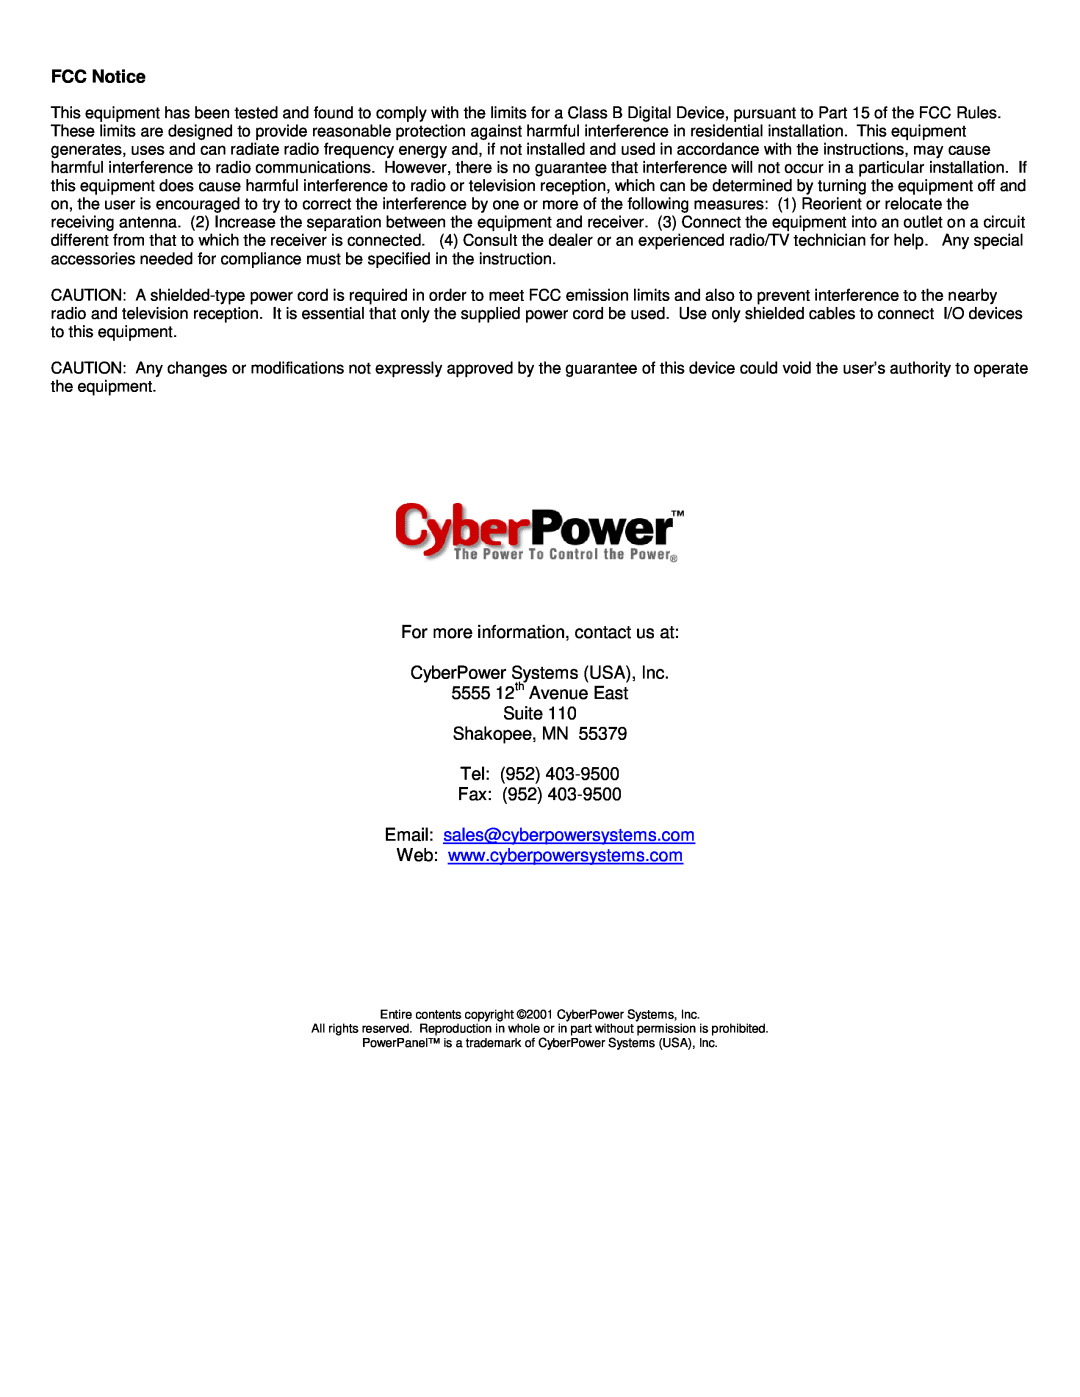 CyberPower Systems CPS900AVR user manual FCC Notice, For more information, contact us at CyberPower Systems USA, Inc 